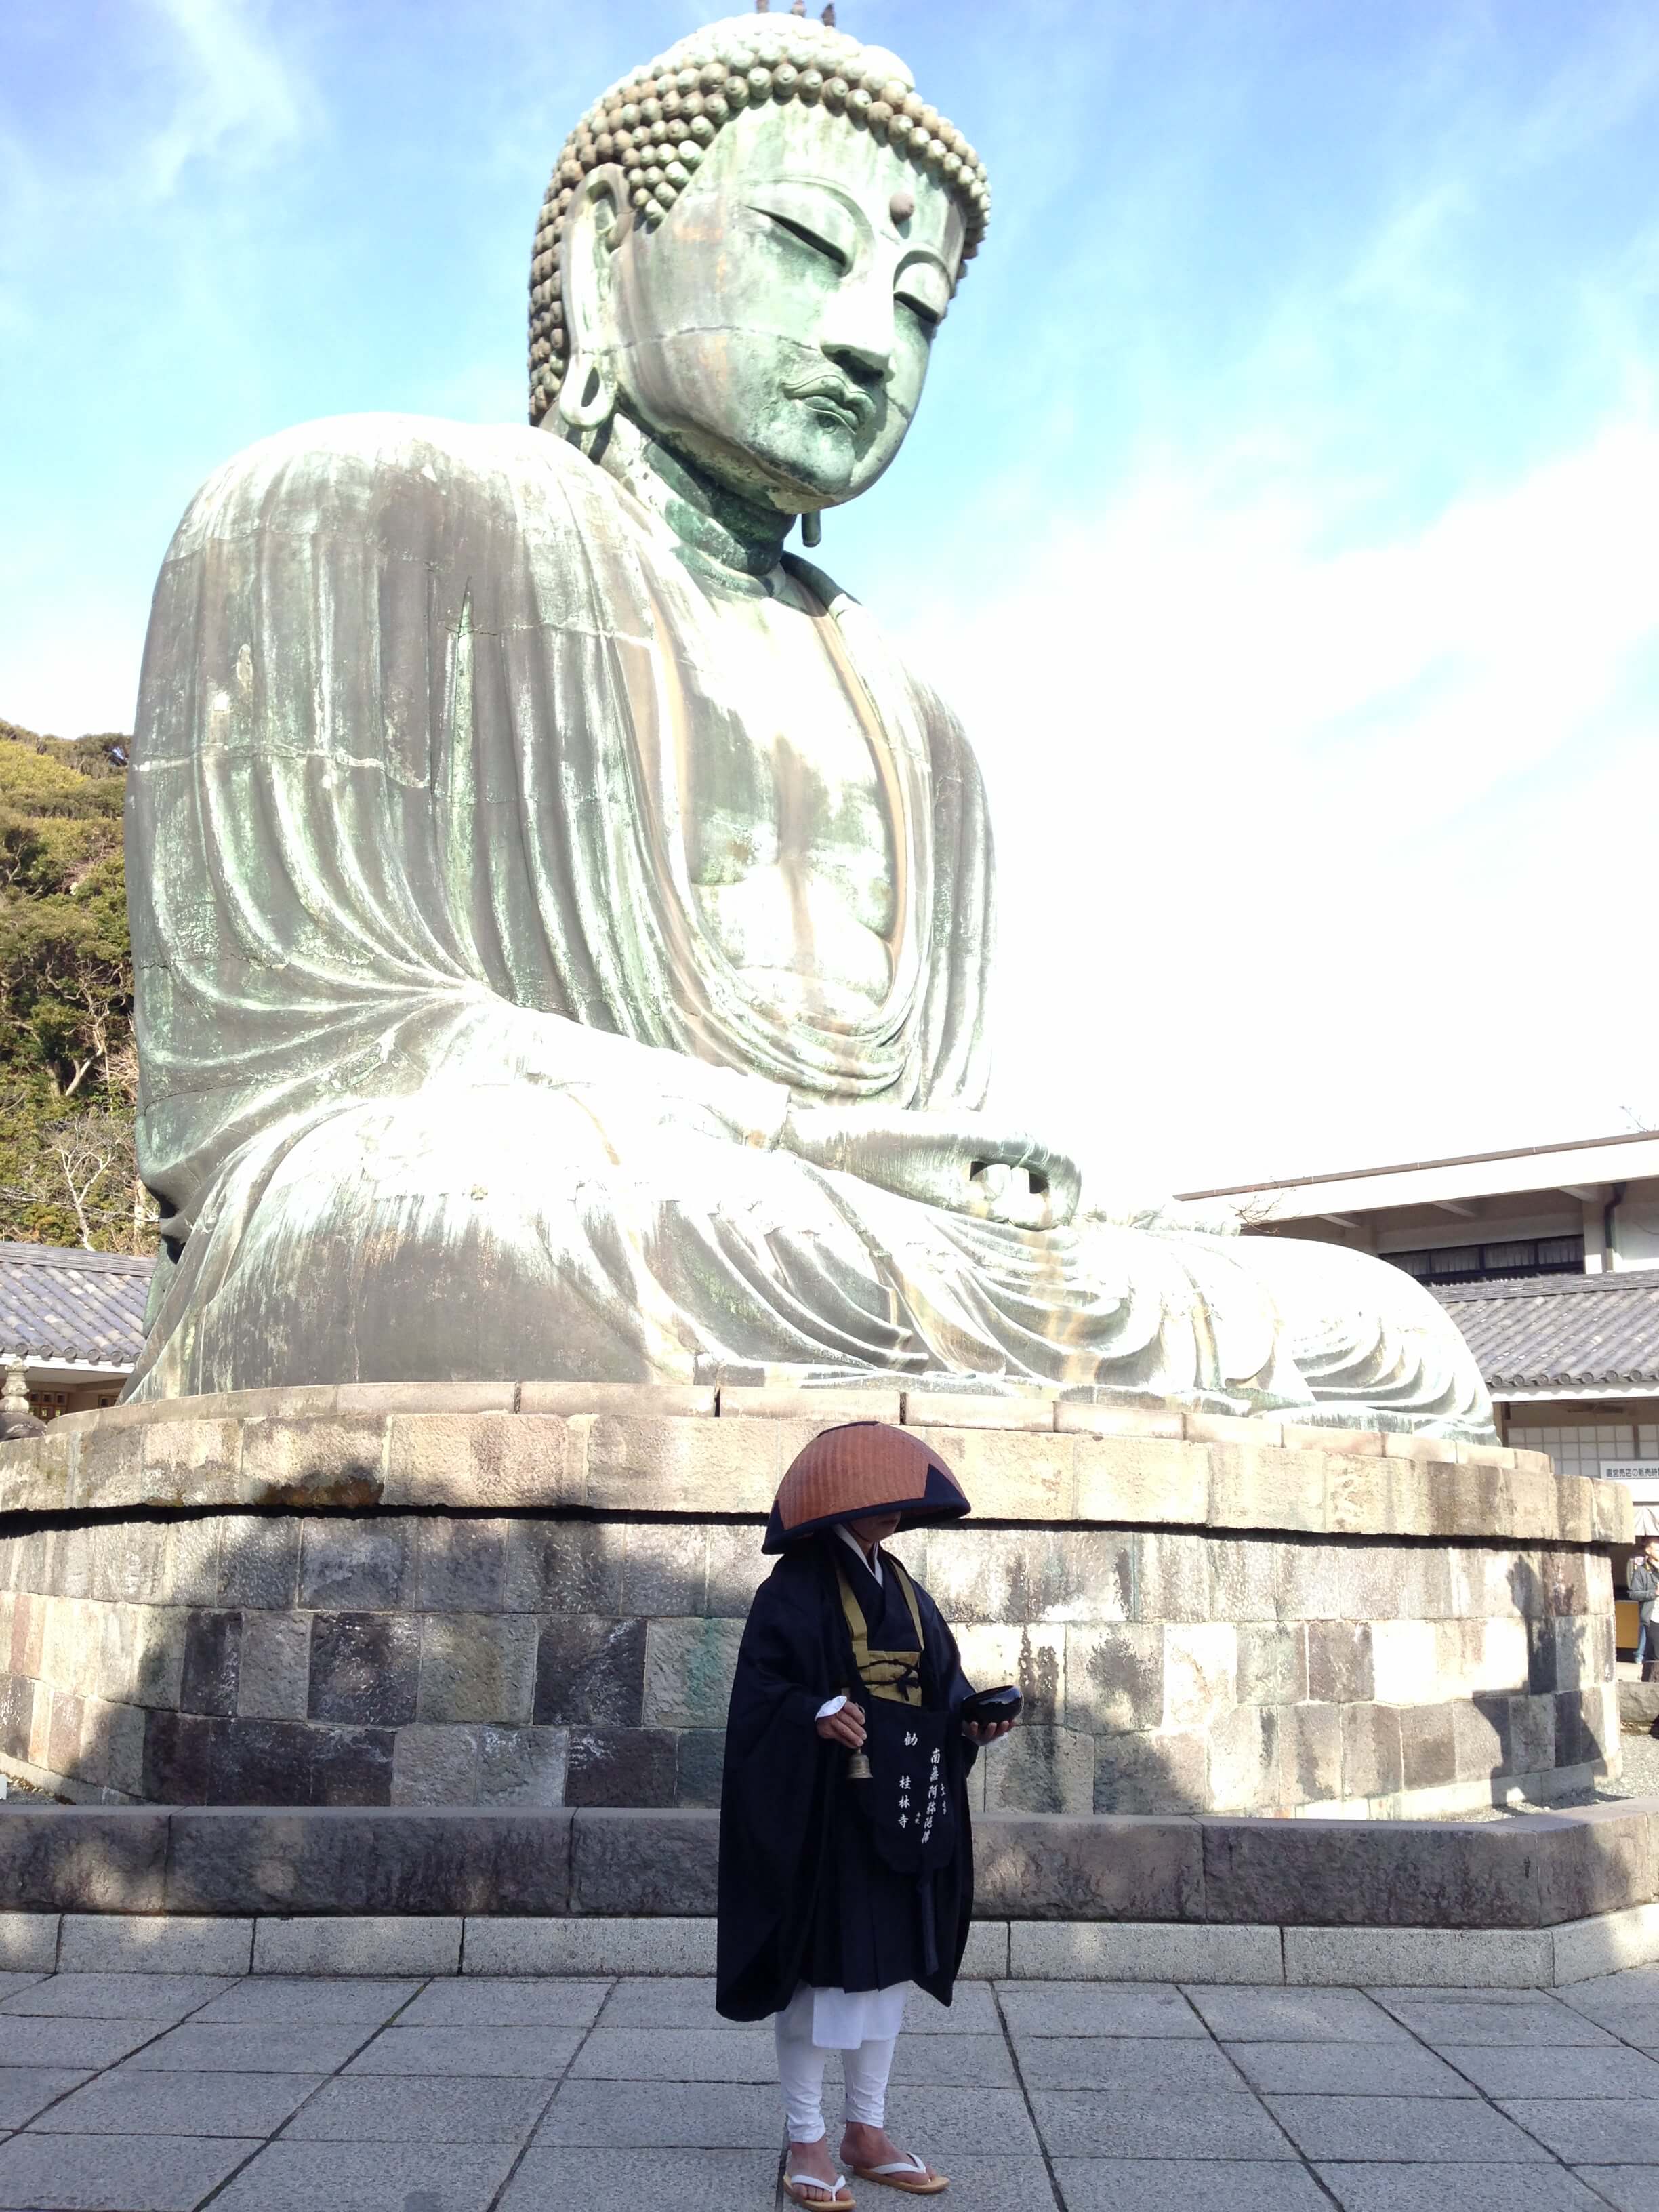 Great Buddha in Kamakura, Japan. I explored this area with a fellow solo traveler I met along the way. 